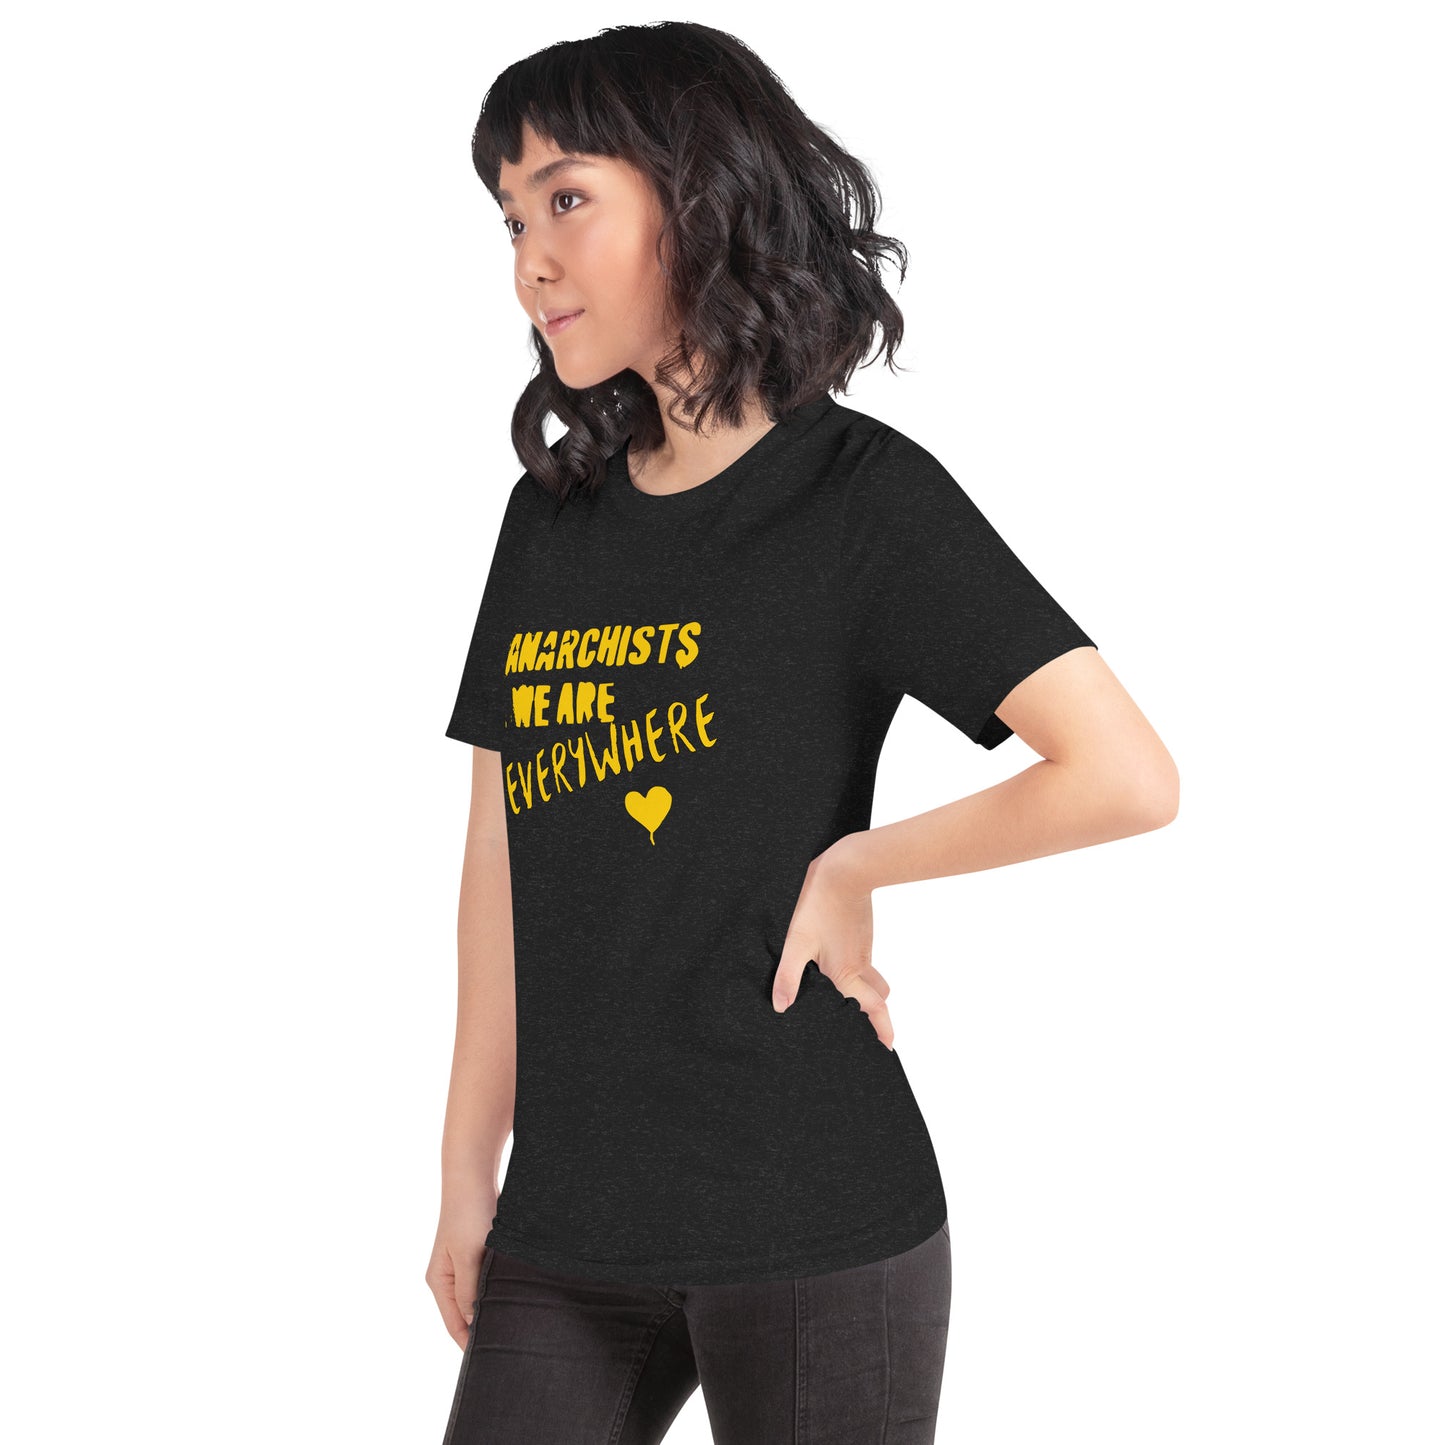 Anarchy Wear "We Are Every Where" Gold Unisex t-shirt